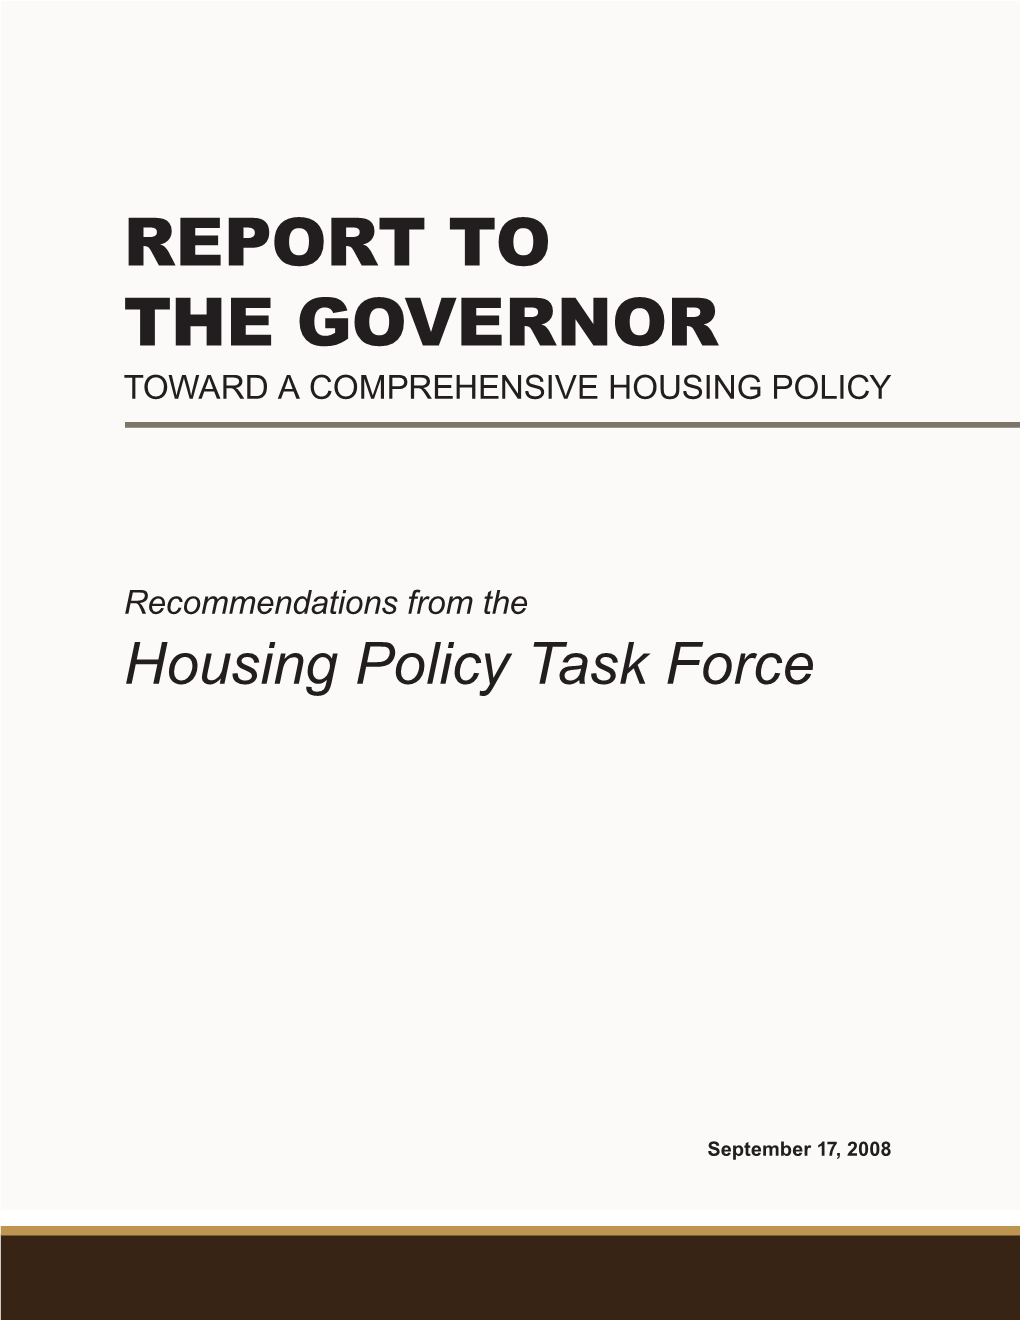 Toward a Comprehensive Housing Policy